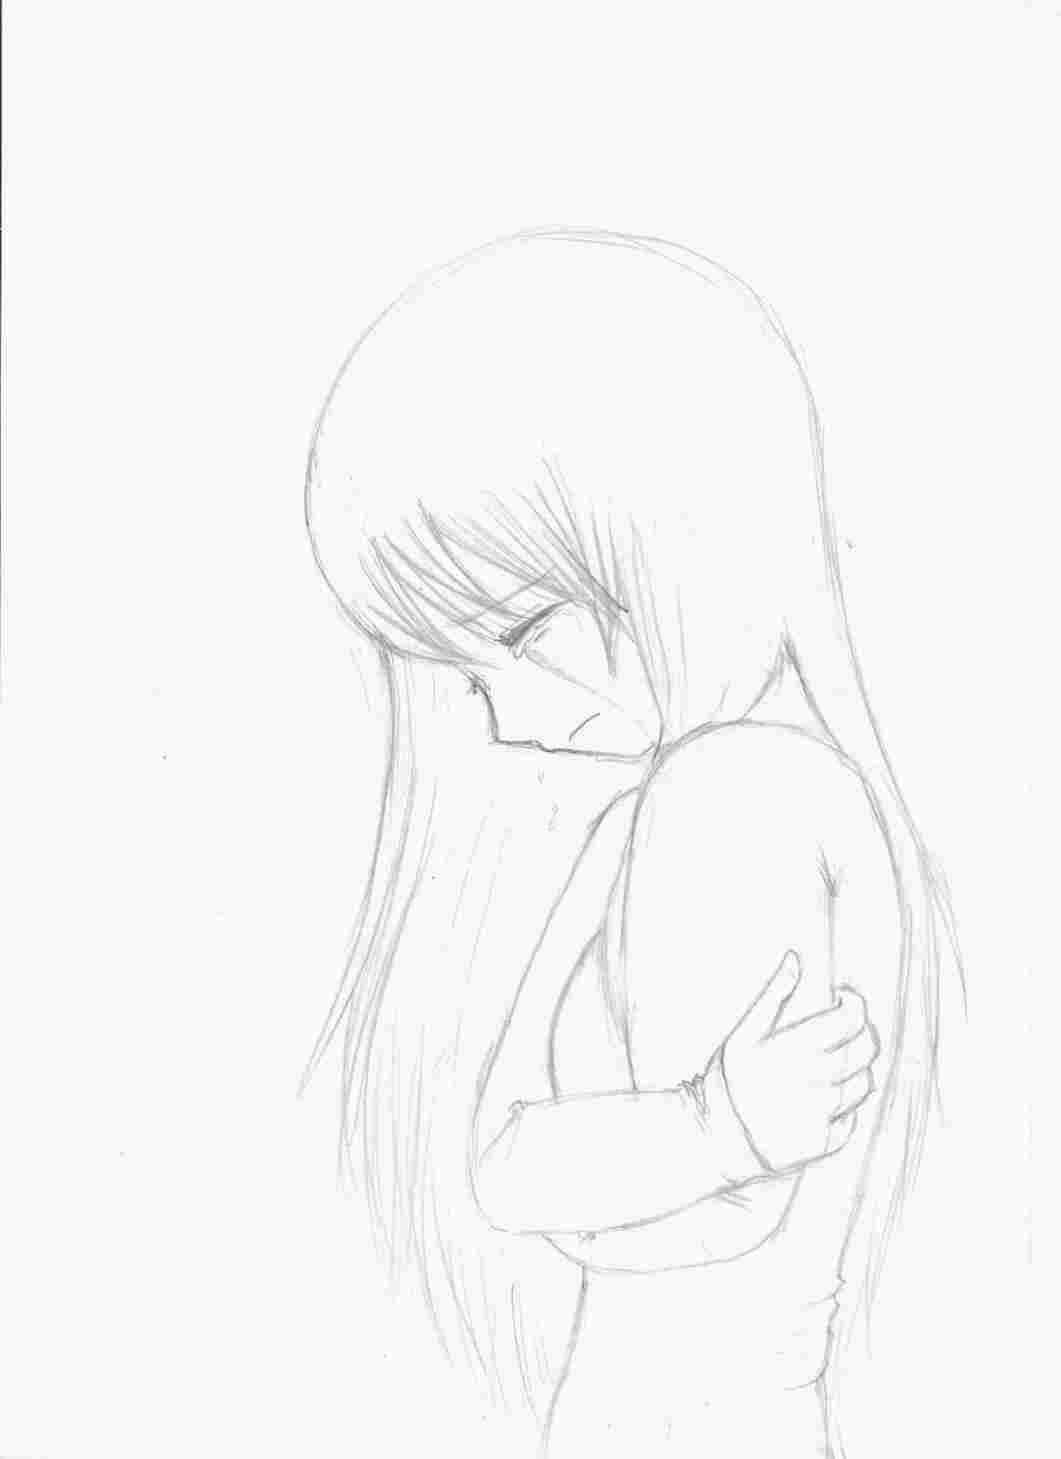 Couple Sketch Anime Sads Wallpapers - Wallpaper Cave